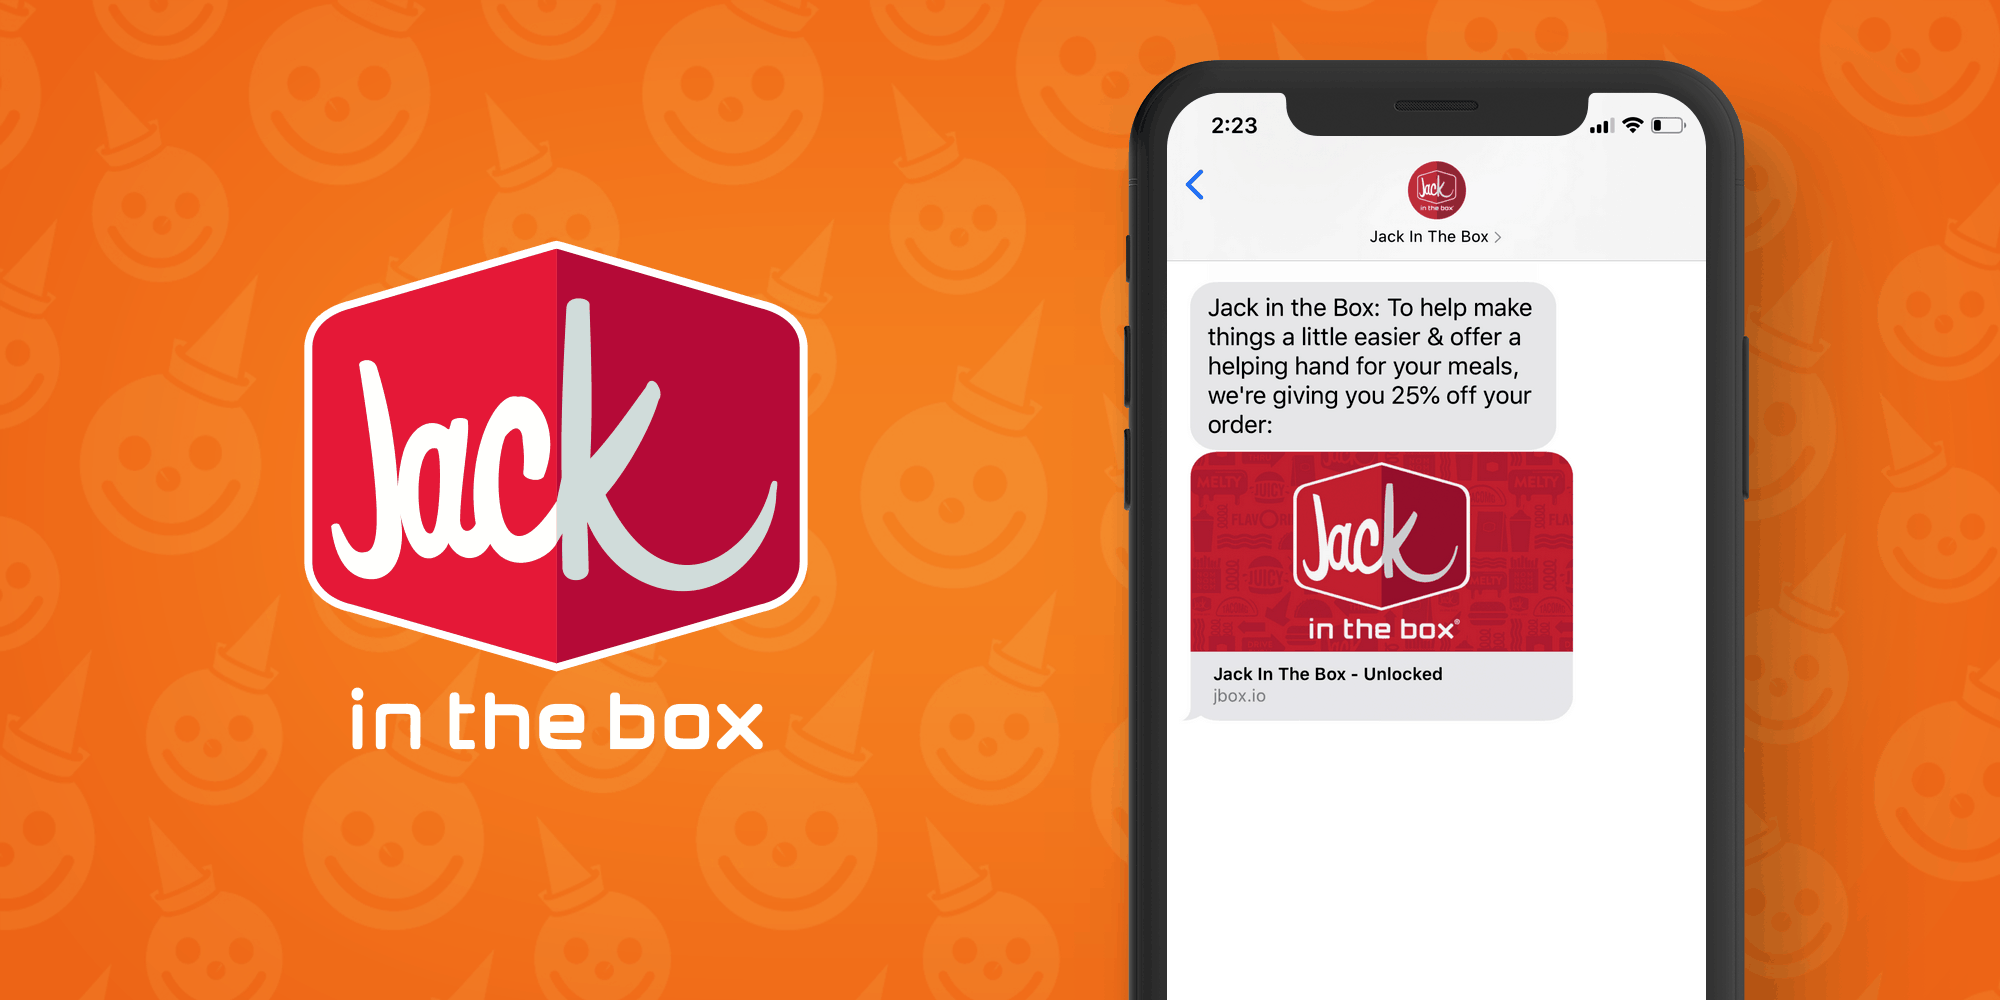 Jack In The Box SMS Marketing Example - 50 Examples of Brands Using SMS Marketing